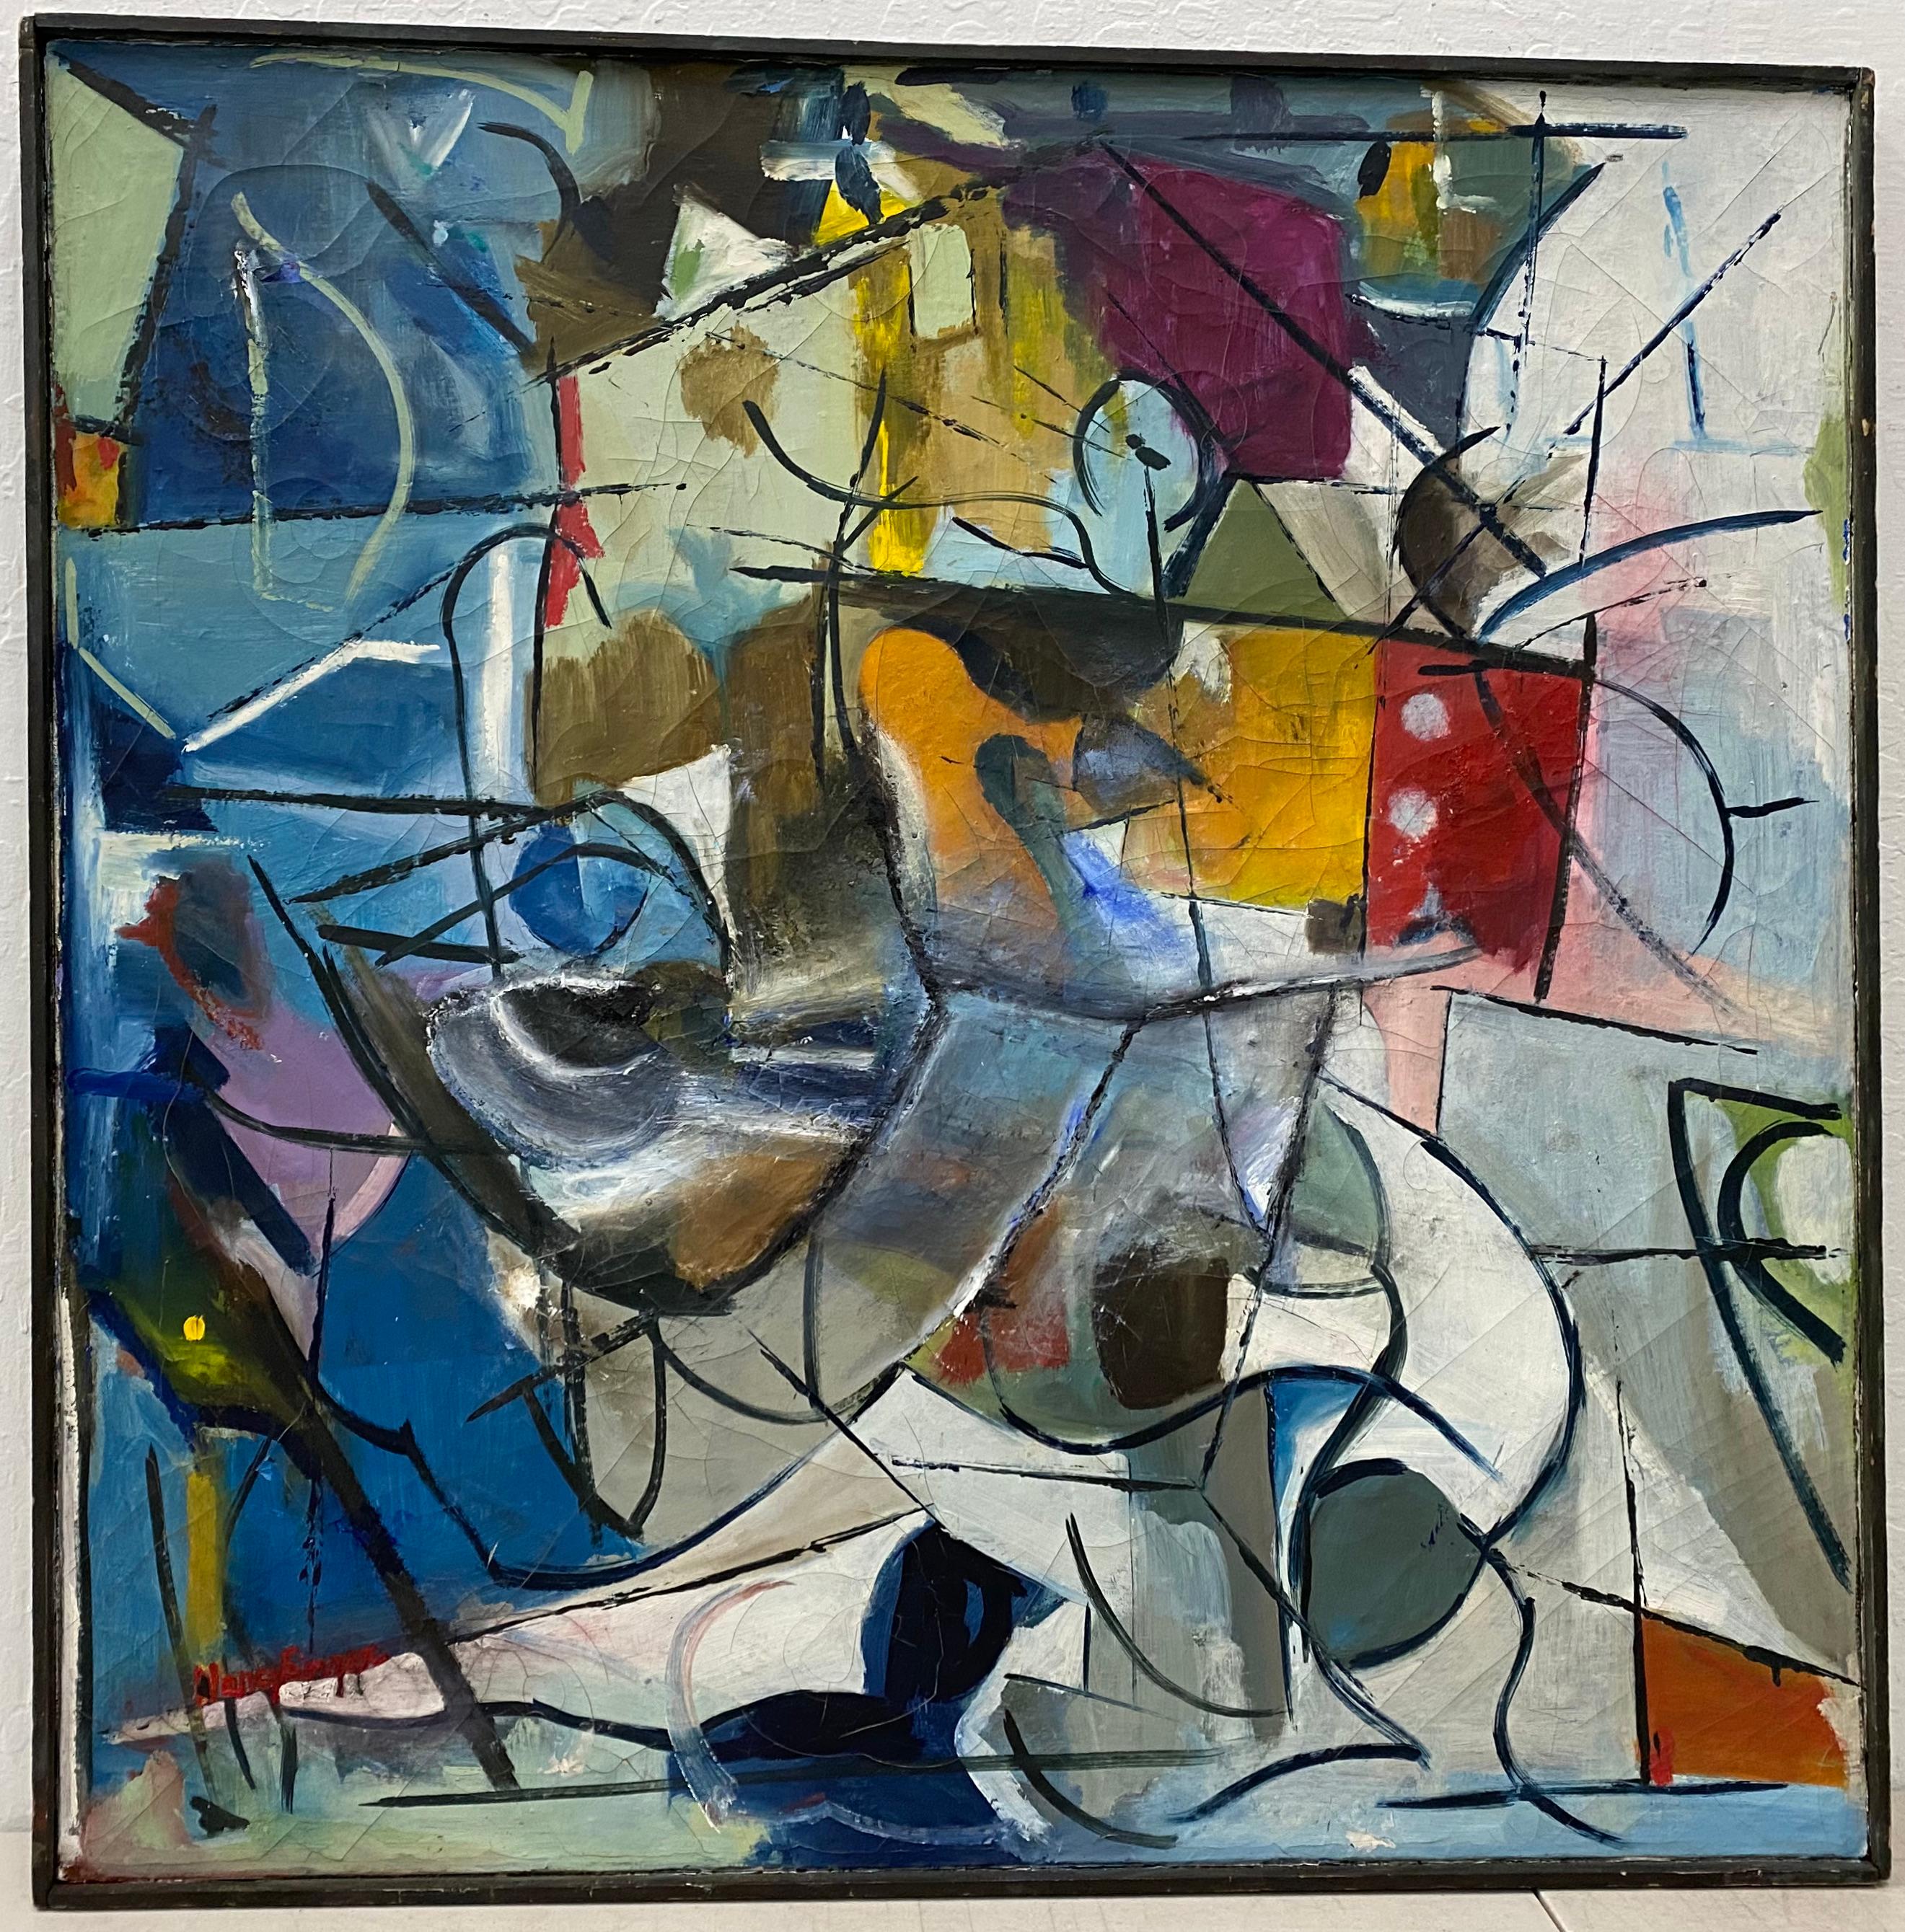 Nancy Singer (American, b. 1912) 

Original oil on canvas

Dimensions 30" wide x 30" high

Frame dimensions 30.5" wide x 30.5" high

The painting shows craquelure throughout (see pics)

A painter and sculptor in modernist style, Nancy Singer studied